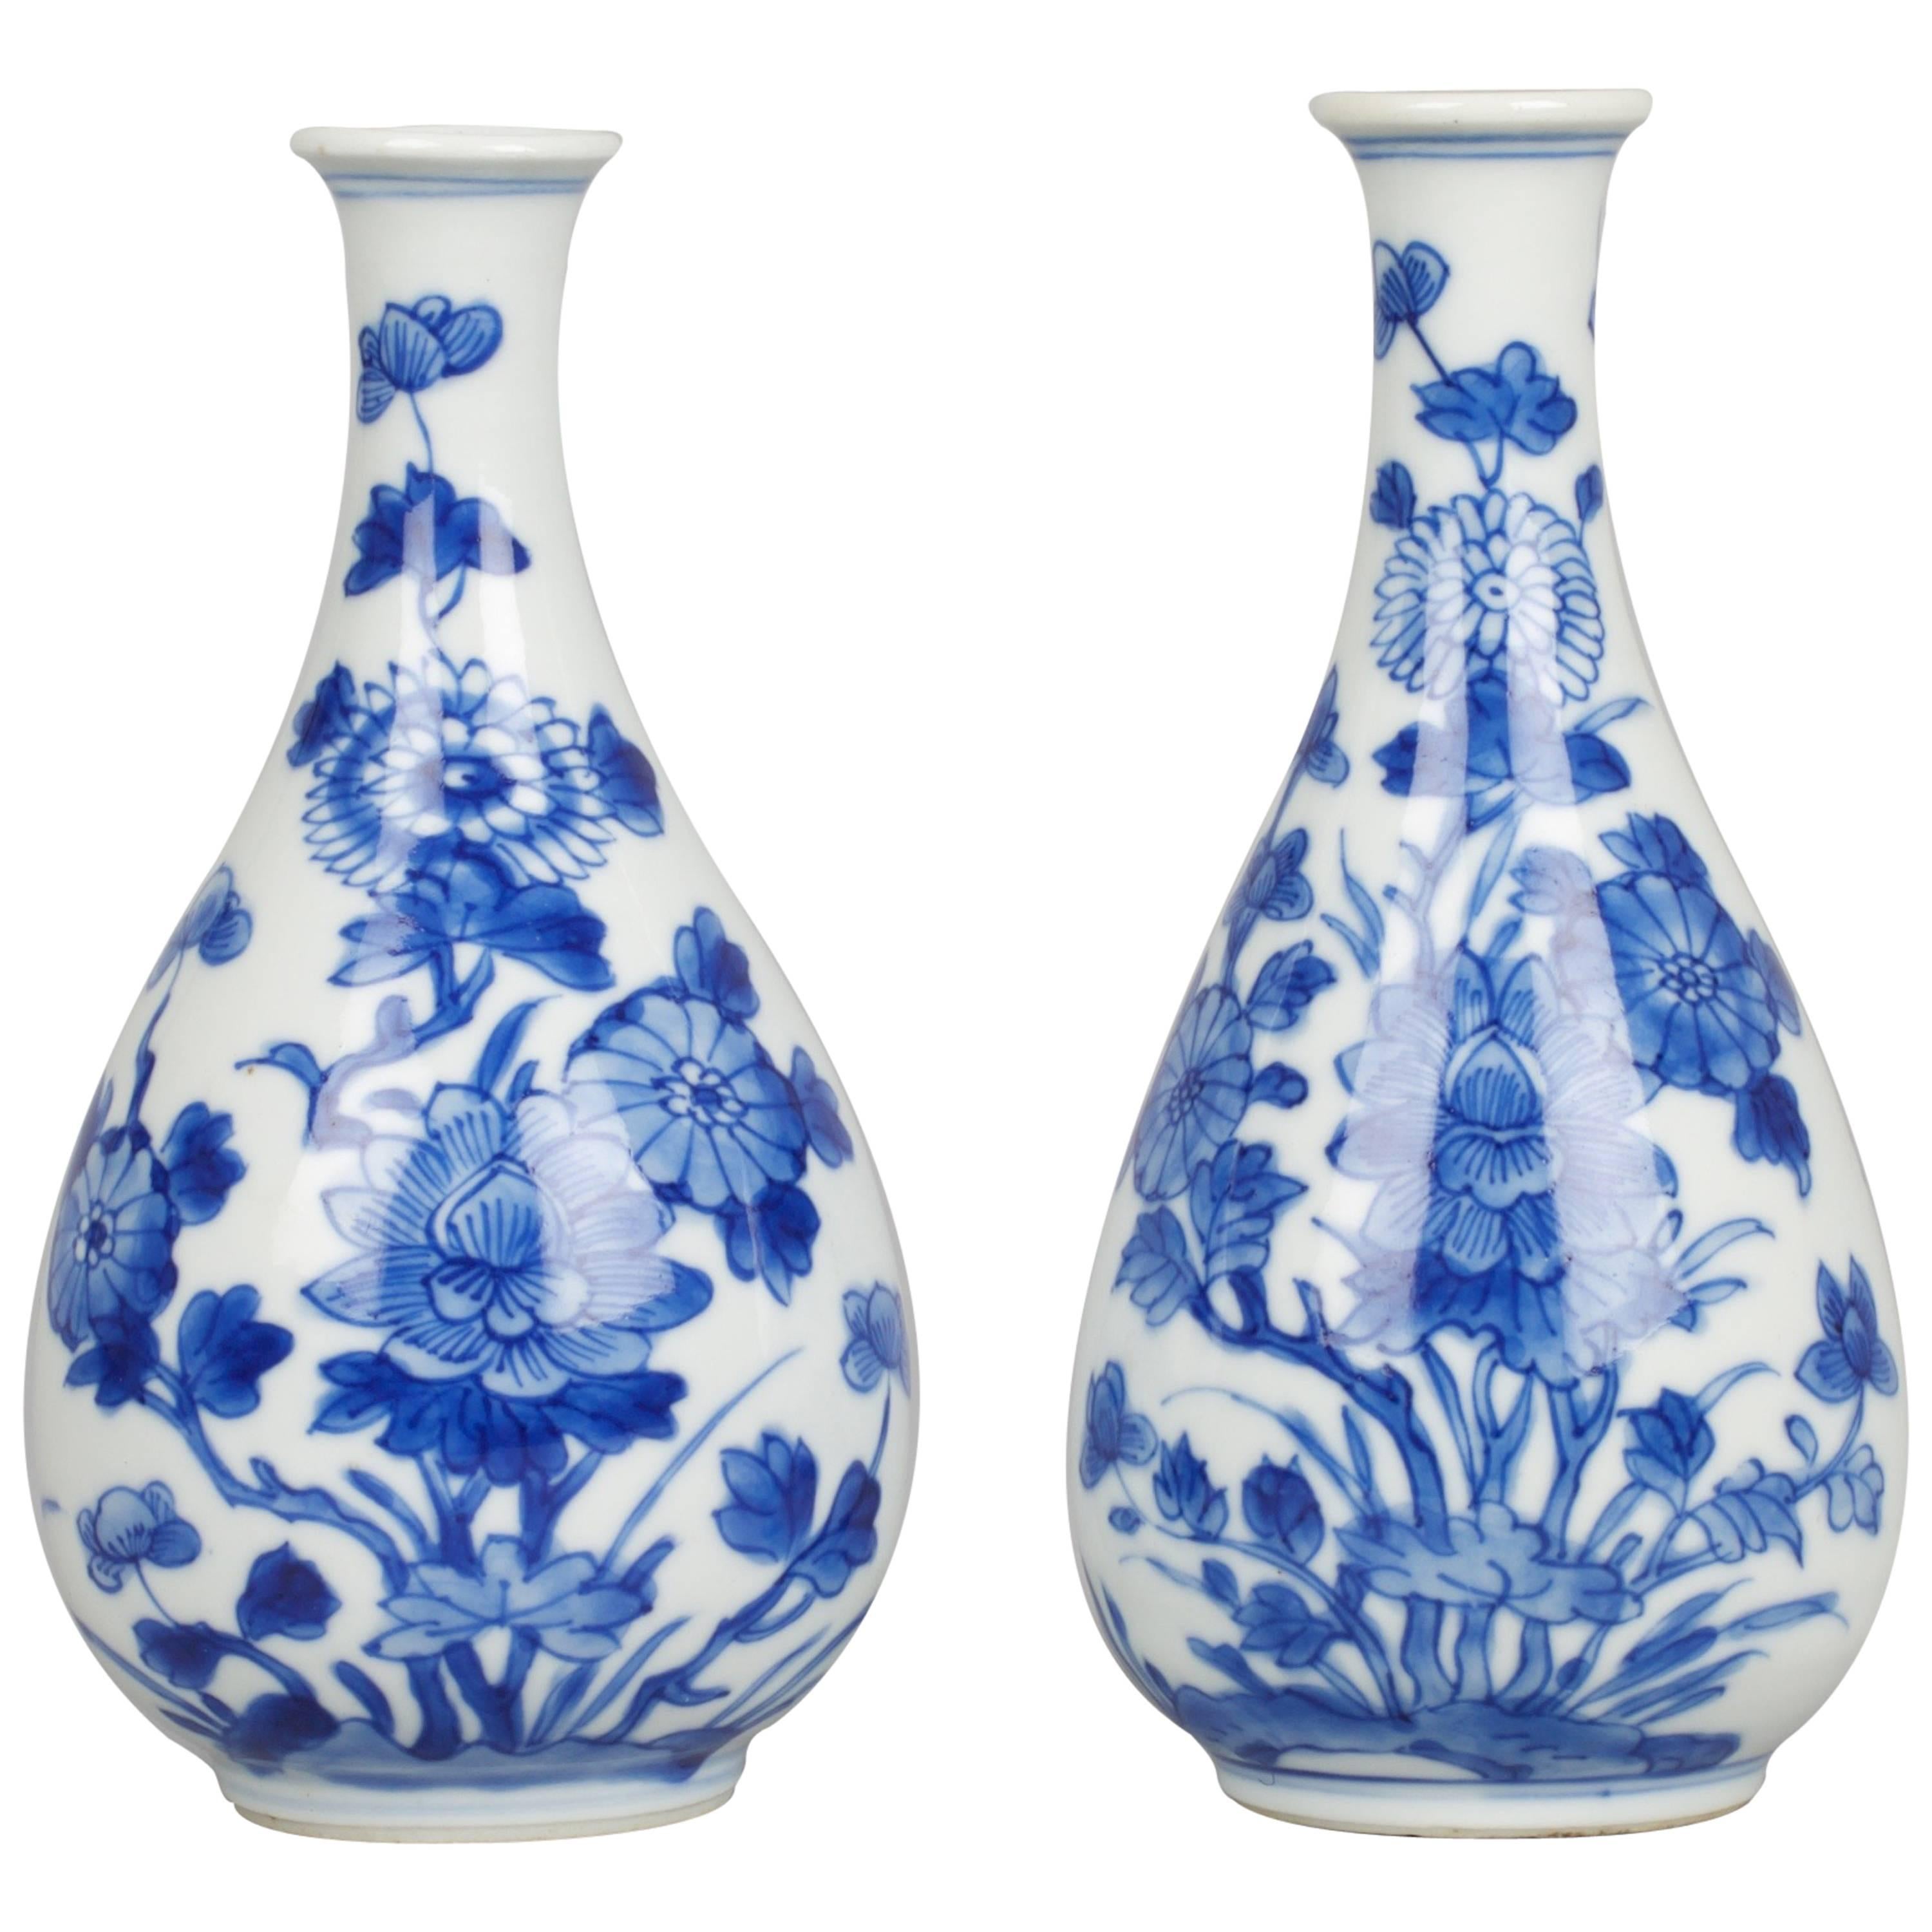 Pair of Chinese Porcelain Blue and White Miniature Bottle Vases, 17th Century For Sale